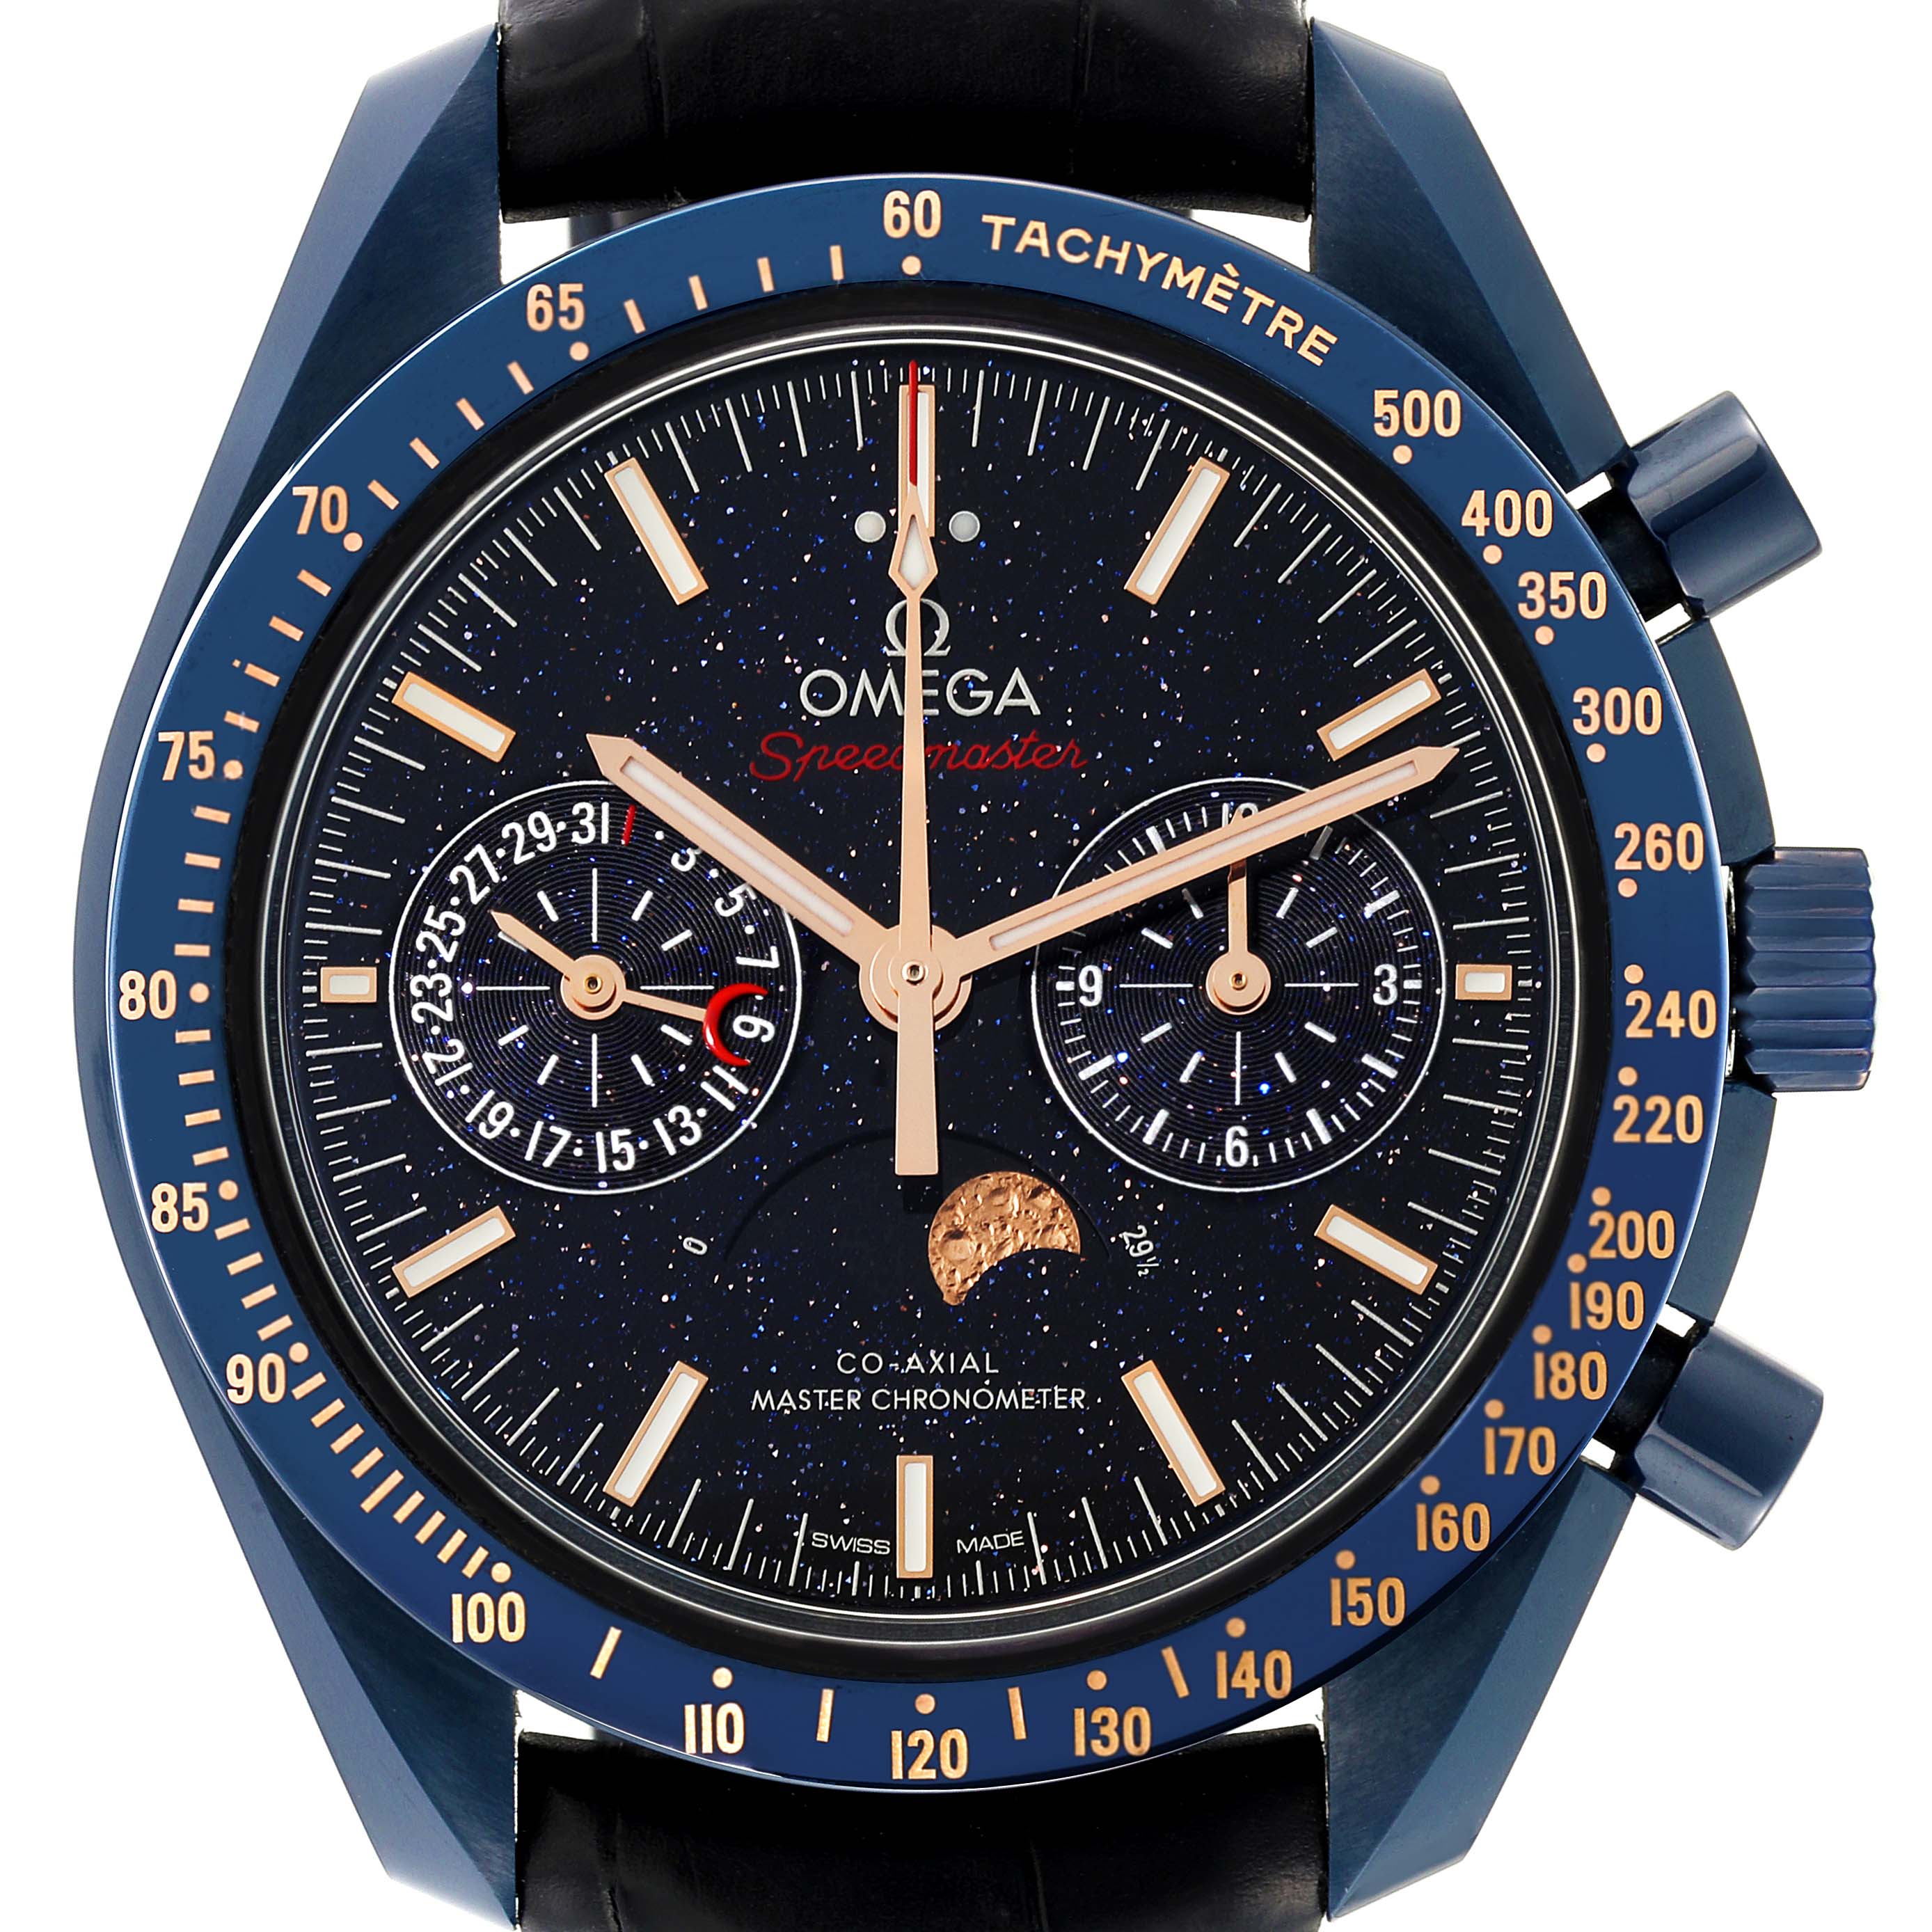 Most Wanted Luxury Brands  Is Omega Watch in Wish List?